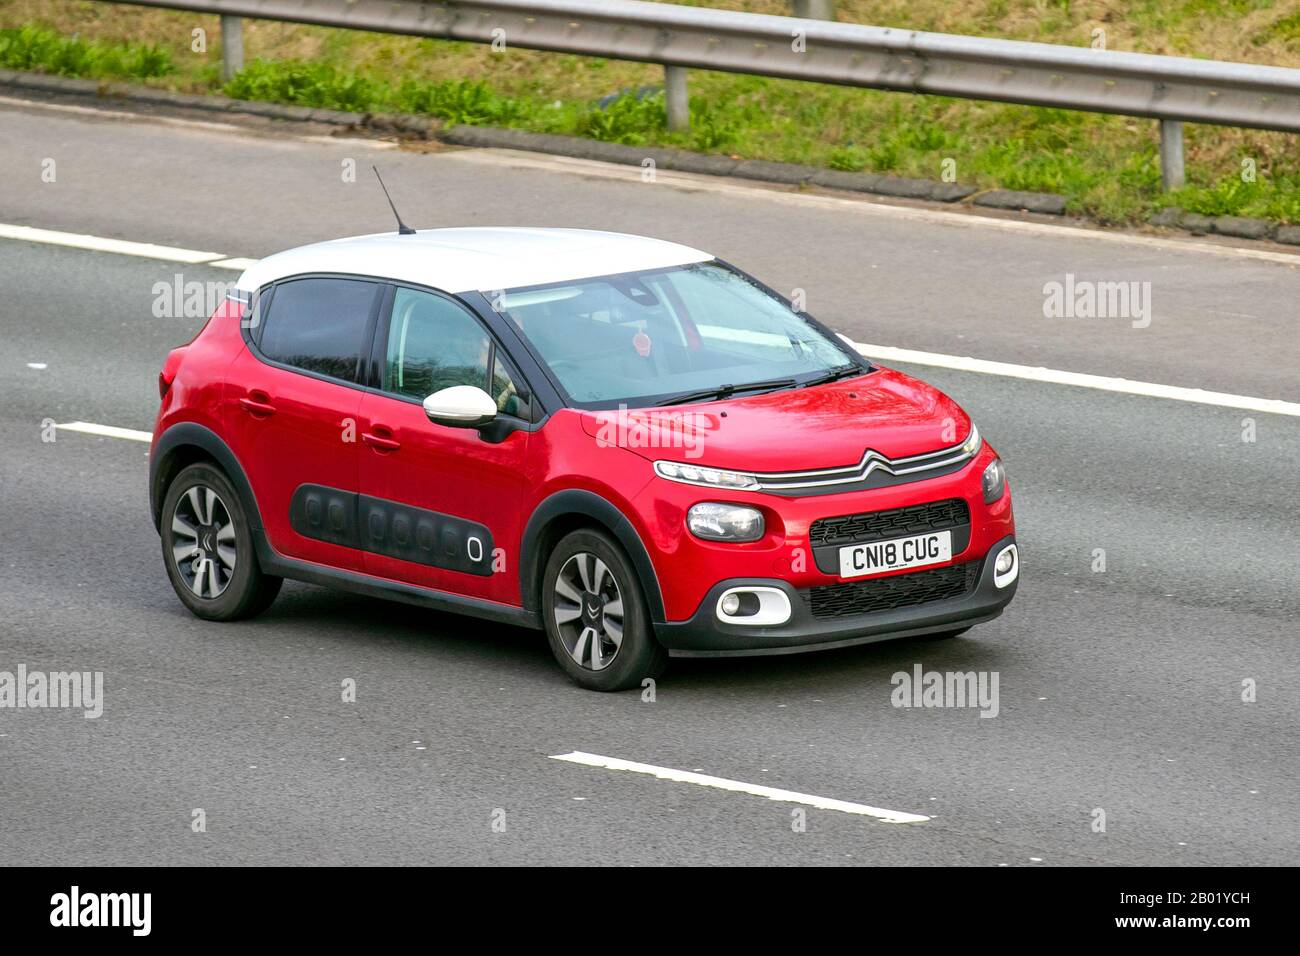 white 2018 red Citroën C3 Flair Puretech; UK Vehicular traffic, transport,  modern vehicles, saloon cars, vehicle driving, roads, motors, motoring  south-bound on the M61 motorway highway Stock Photo - Alamy